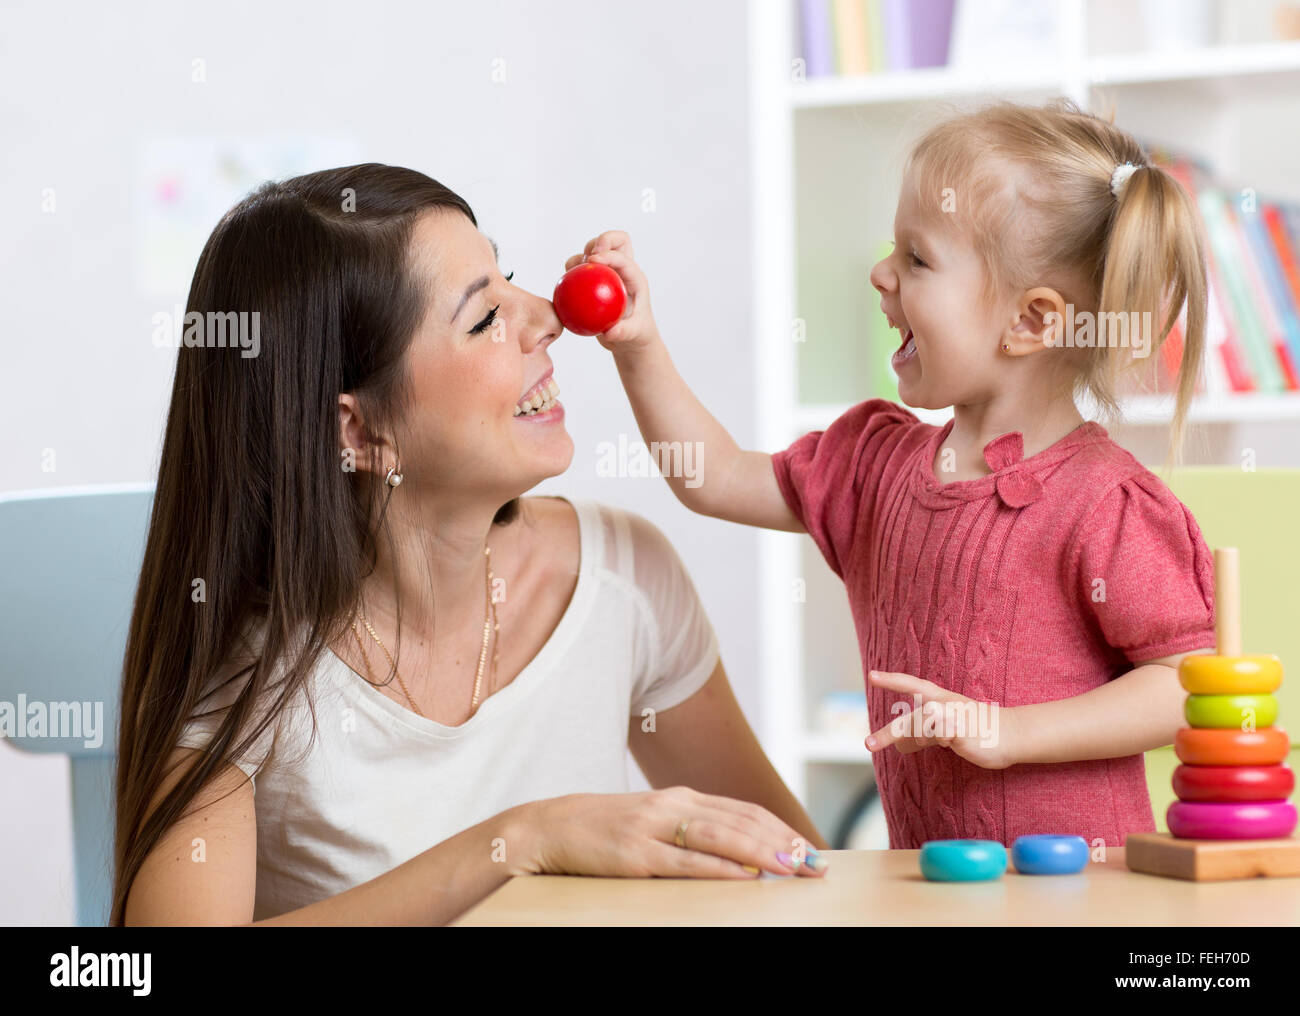 Smiling mother and child daughter in the nursery, happy time and togetherness Stock Photo